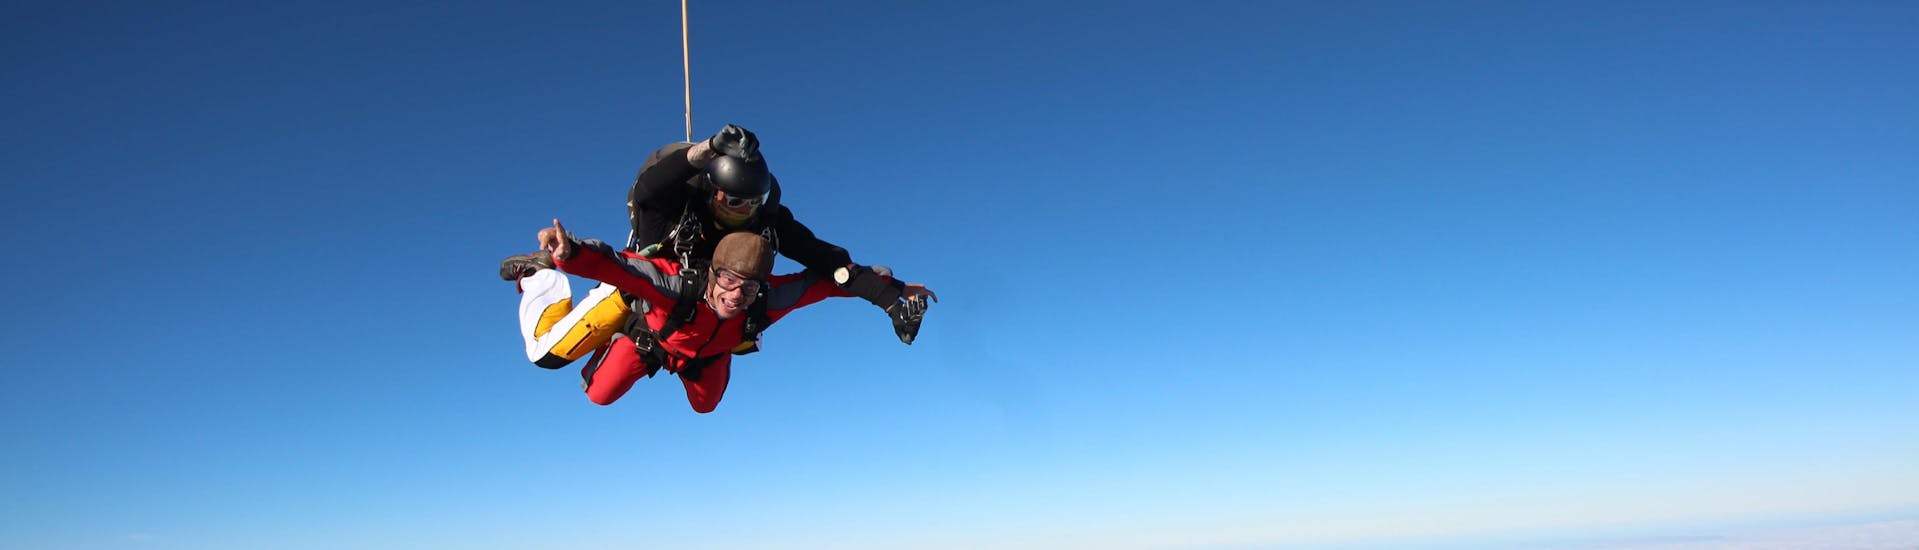 Skydiving in Bay of Islands - 9,000 ft or 12,000 ft.